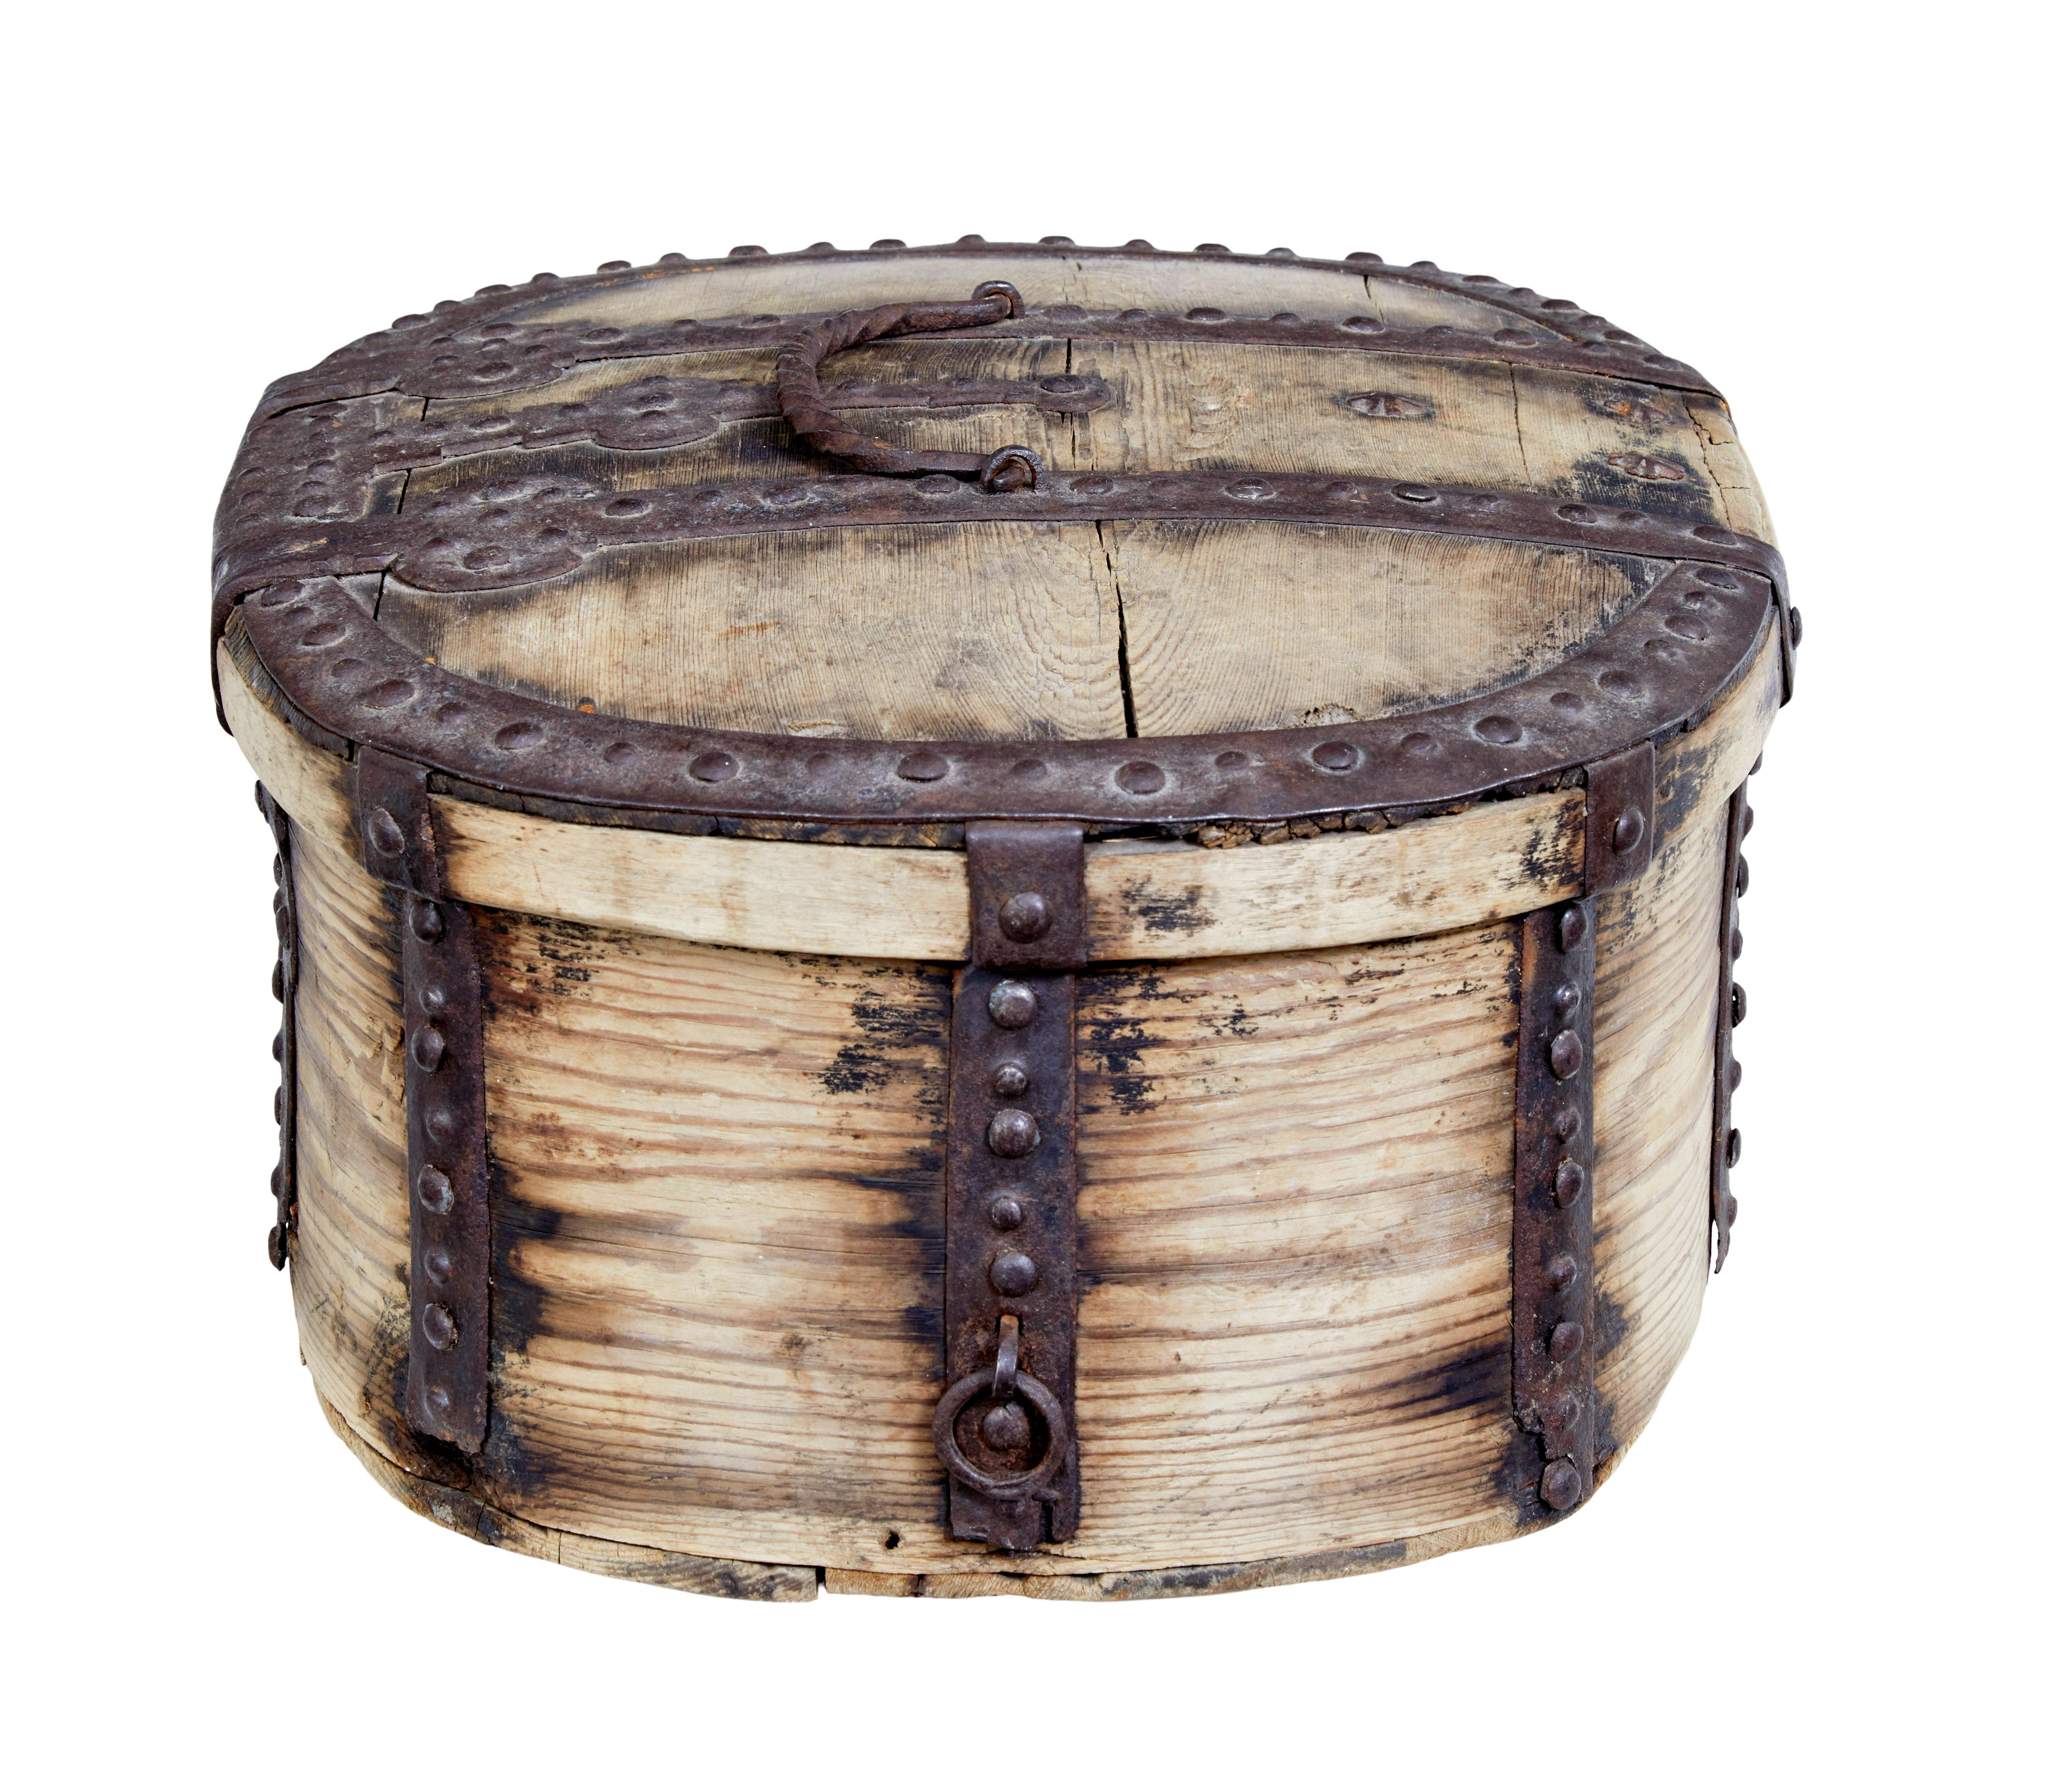 Mid-18th century Swedish pine baroque metal bound box, circa 1740.

Good quality oval baroque period decorative box. Profusely decorated and bound by iron strap work, edging and hinges. All with original studs.

Expected surface marks, age